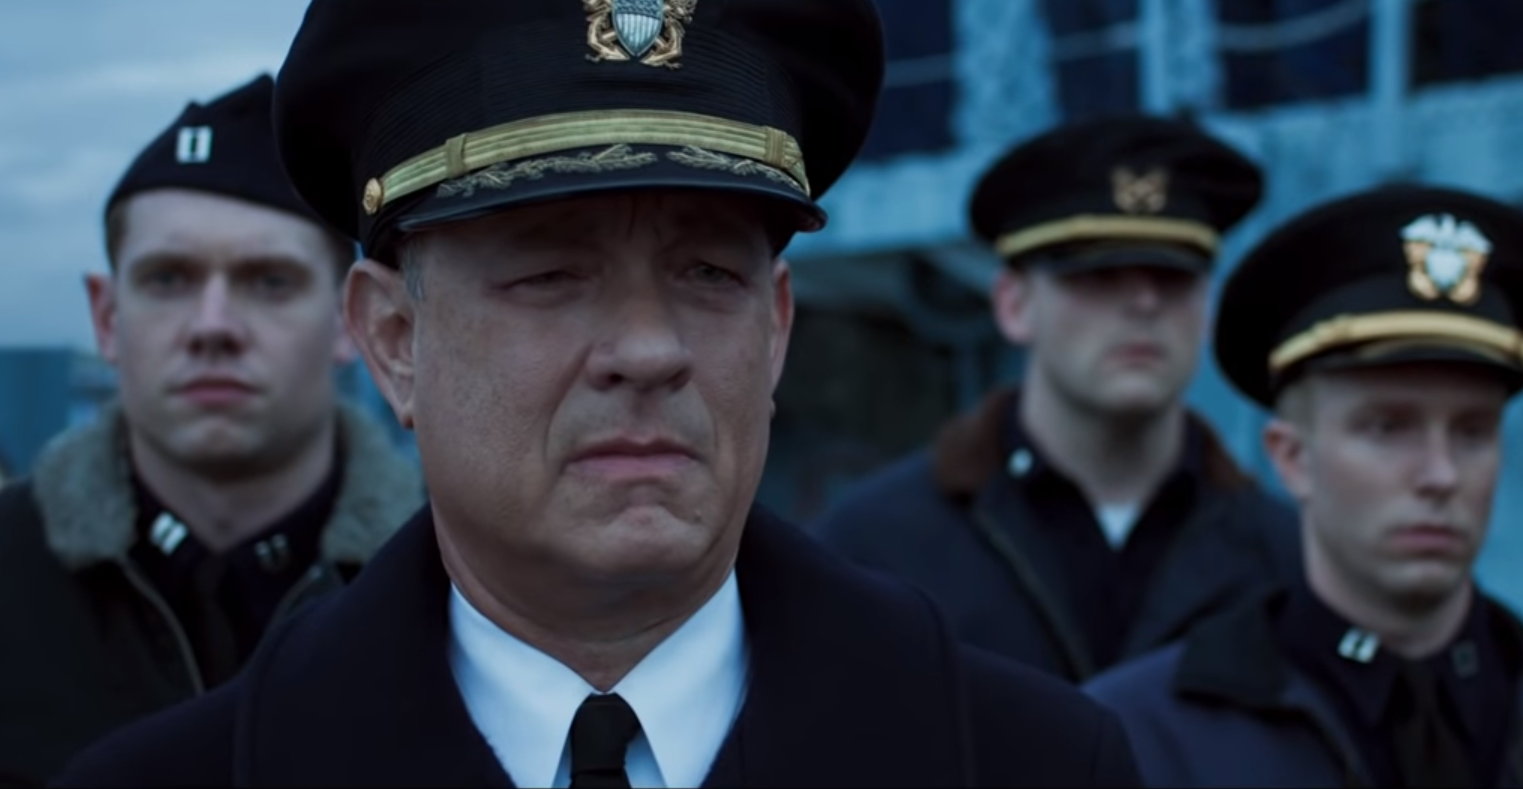 Tom Hanks is here to ‘bring hell from on high’ in new WWII naval flick ‘Greyhound’